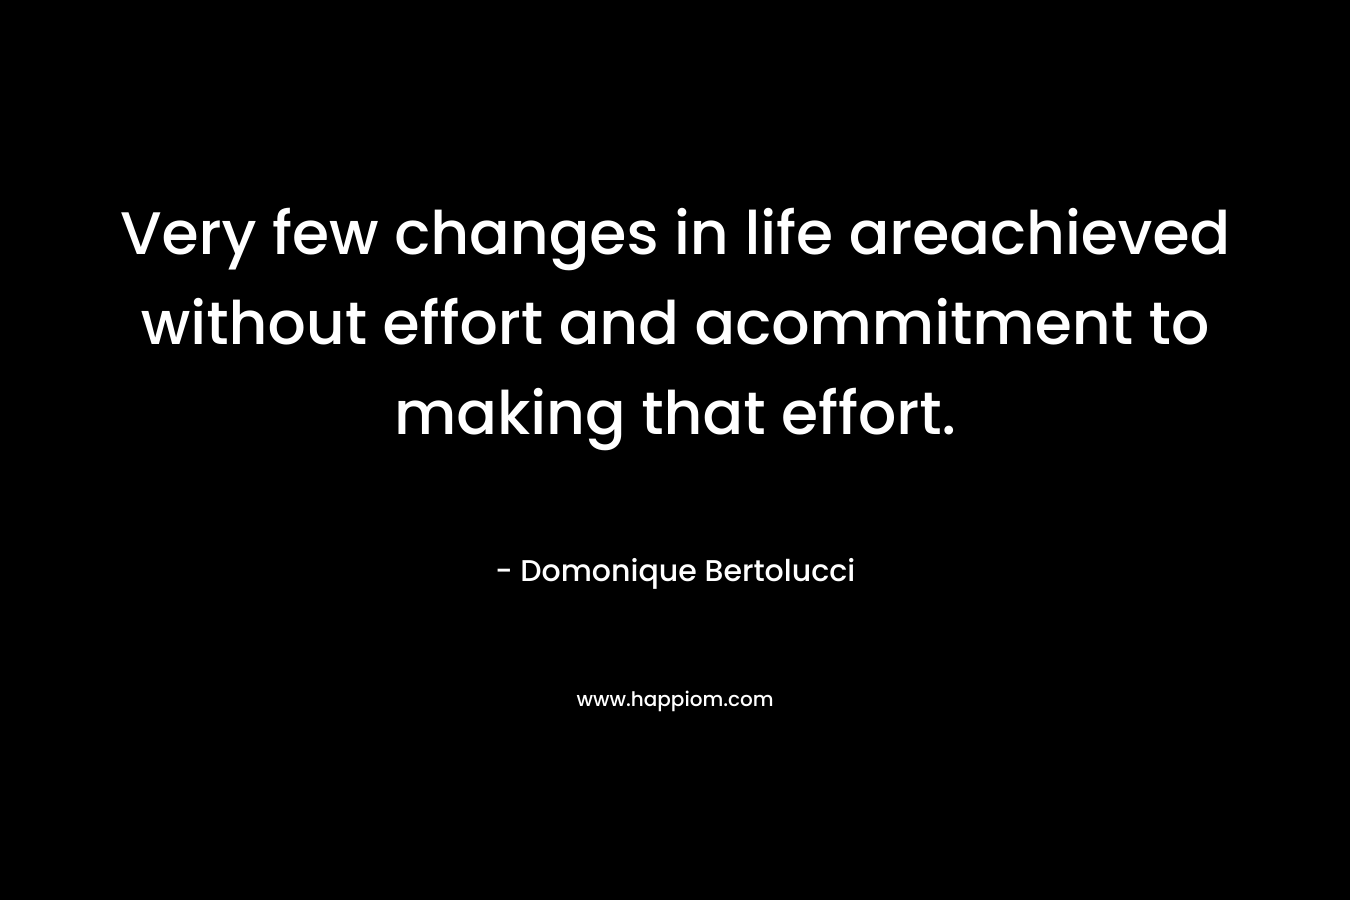 Very few changes in life areachieved without effort and acommitment to making that effort. – Domonique Bertolucci